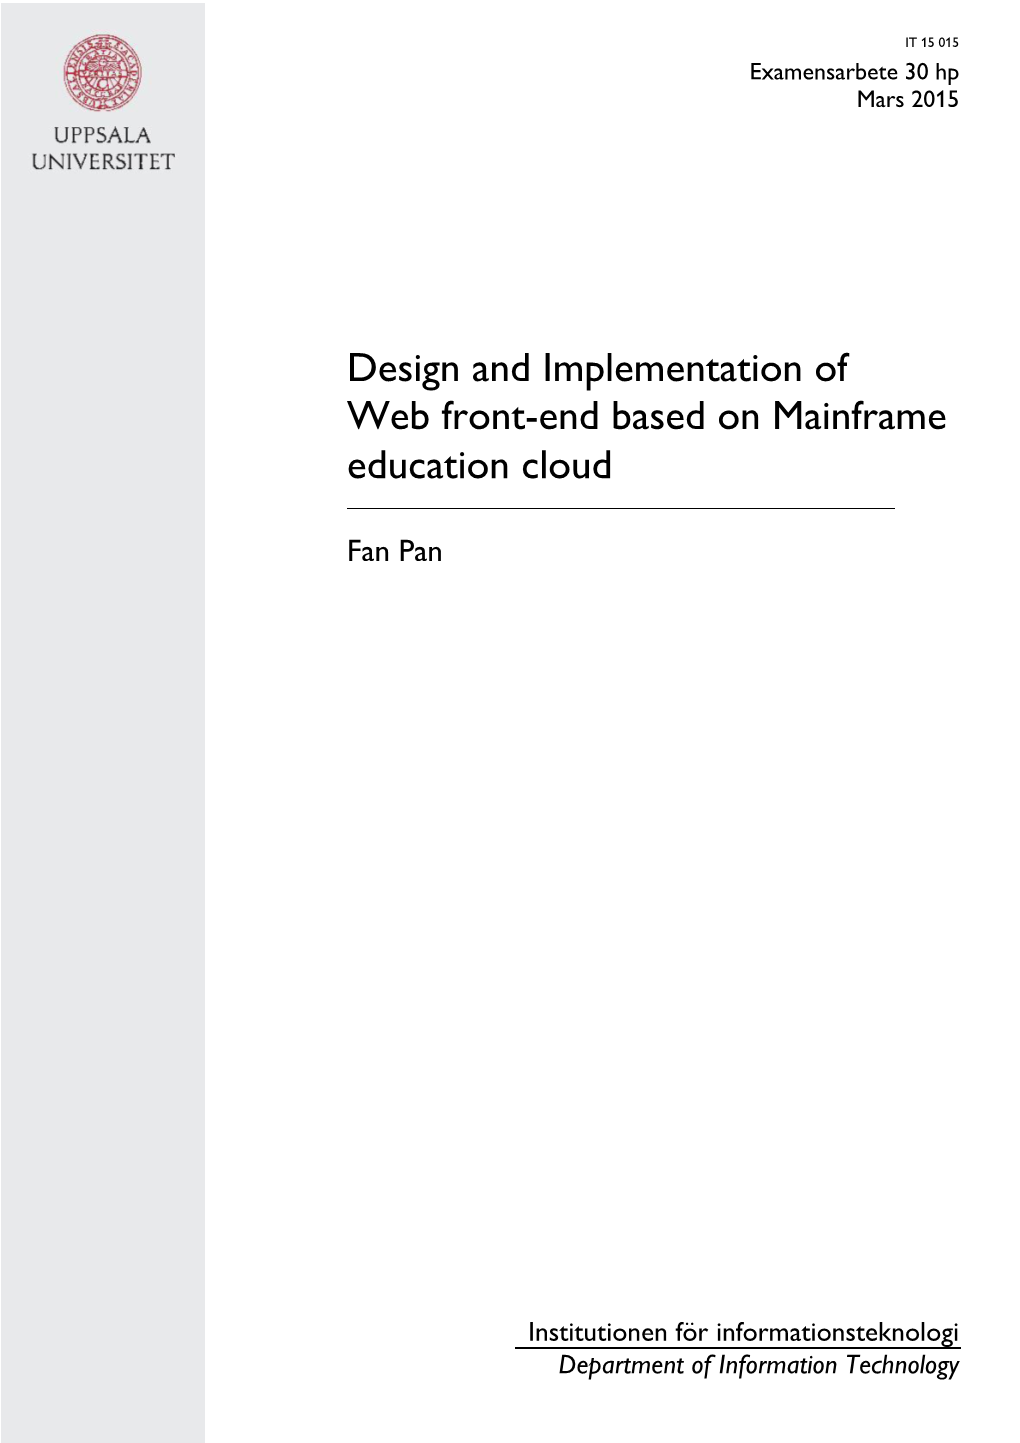 Design and Implementation of Web Front-End Based on Mainframe Education Cloud